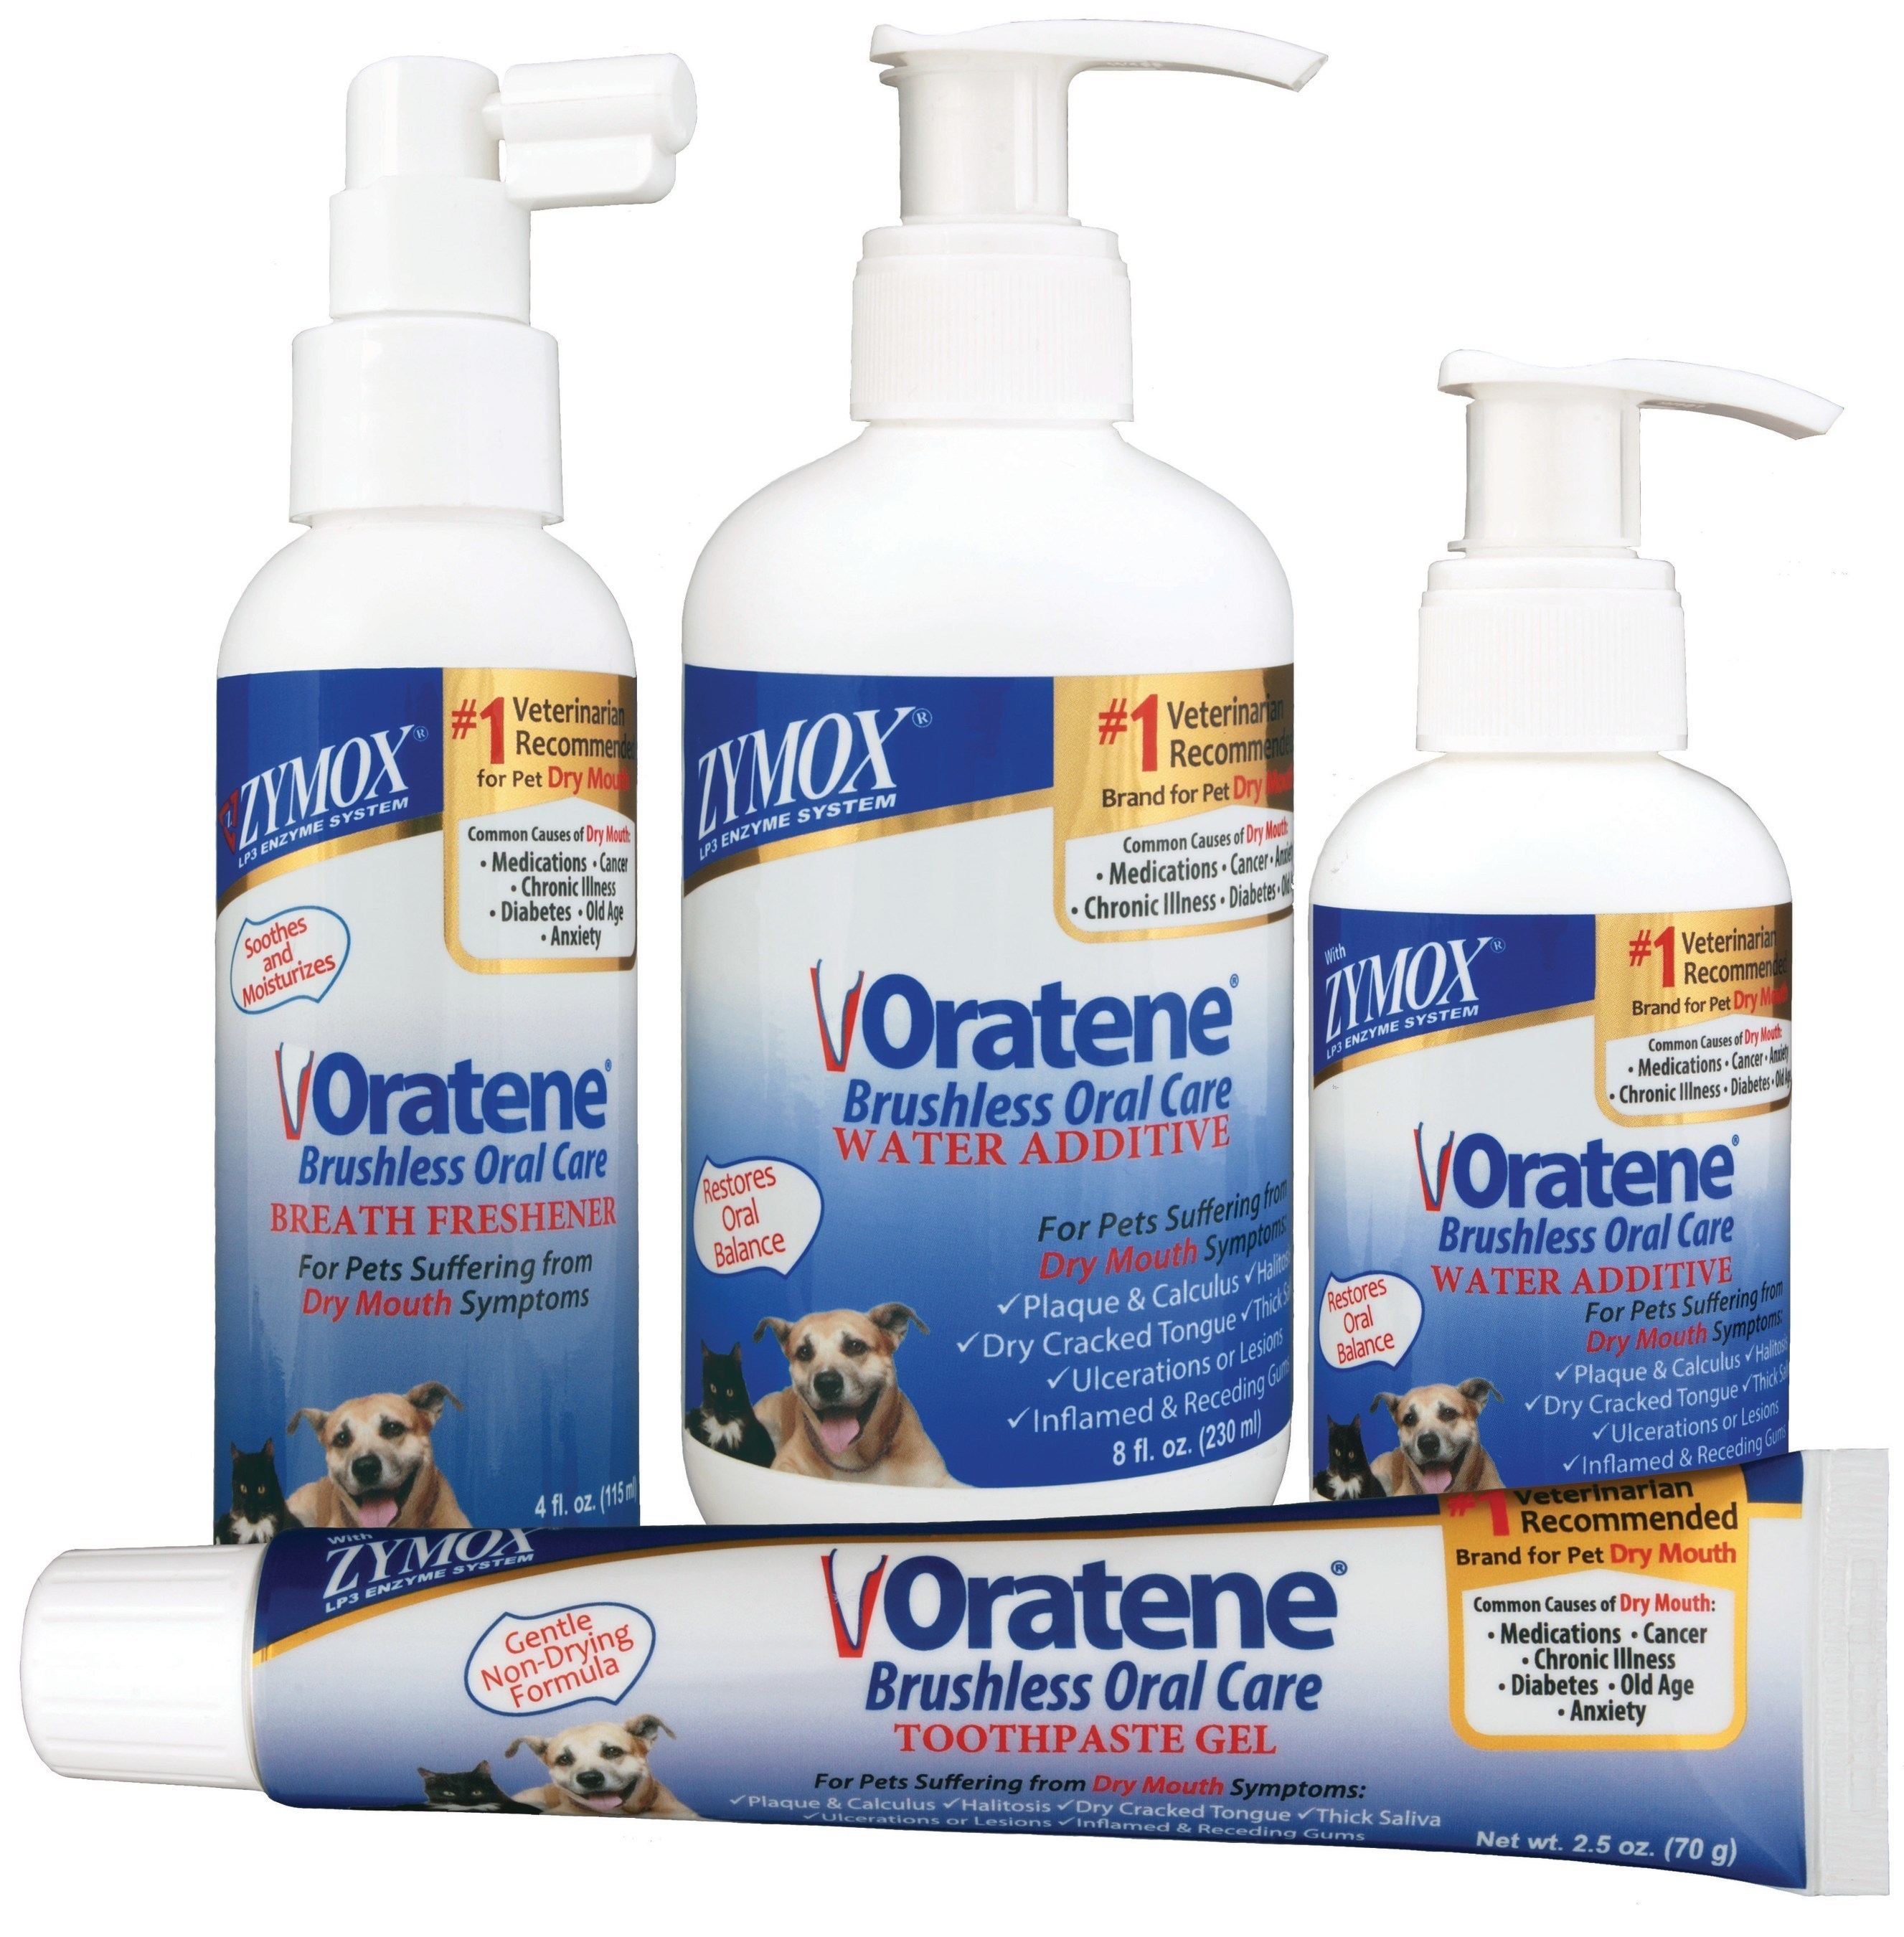 ZYMOX Oratene Brushless Oral Care for Pets